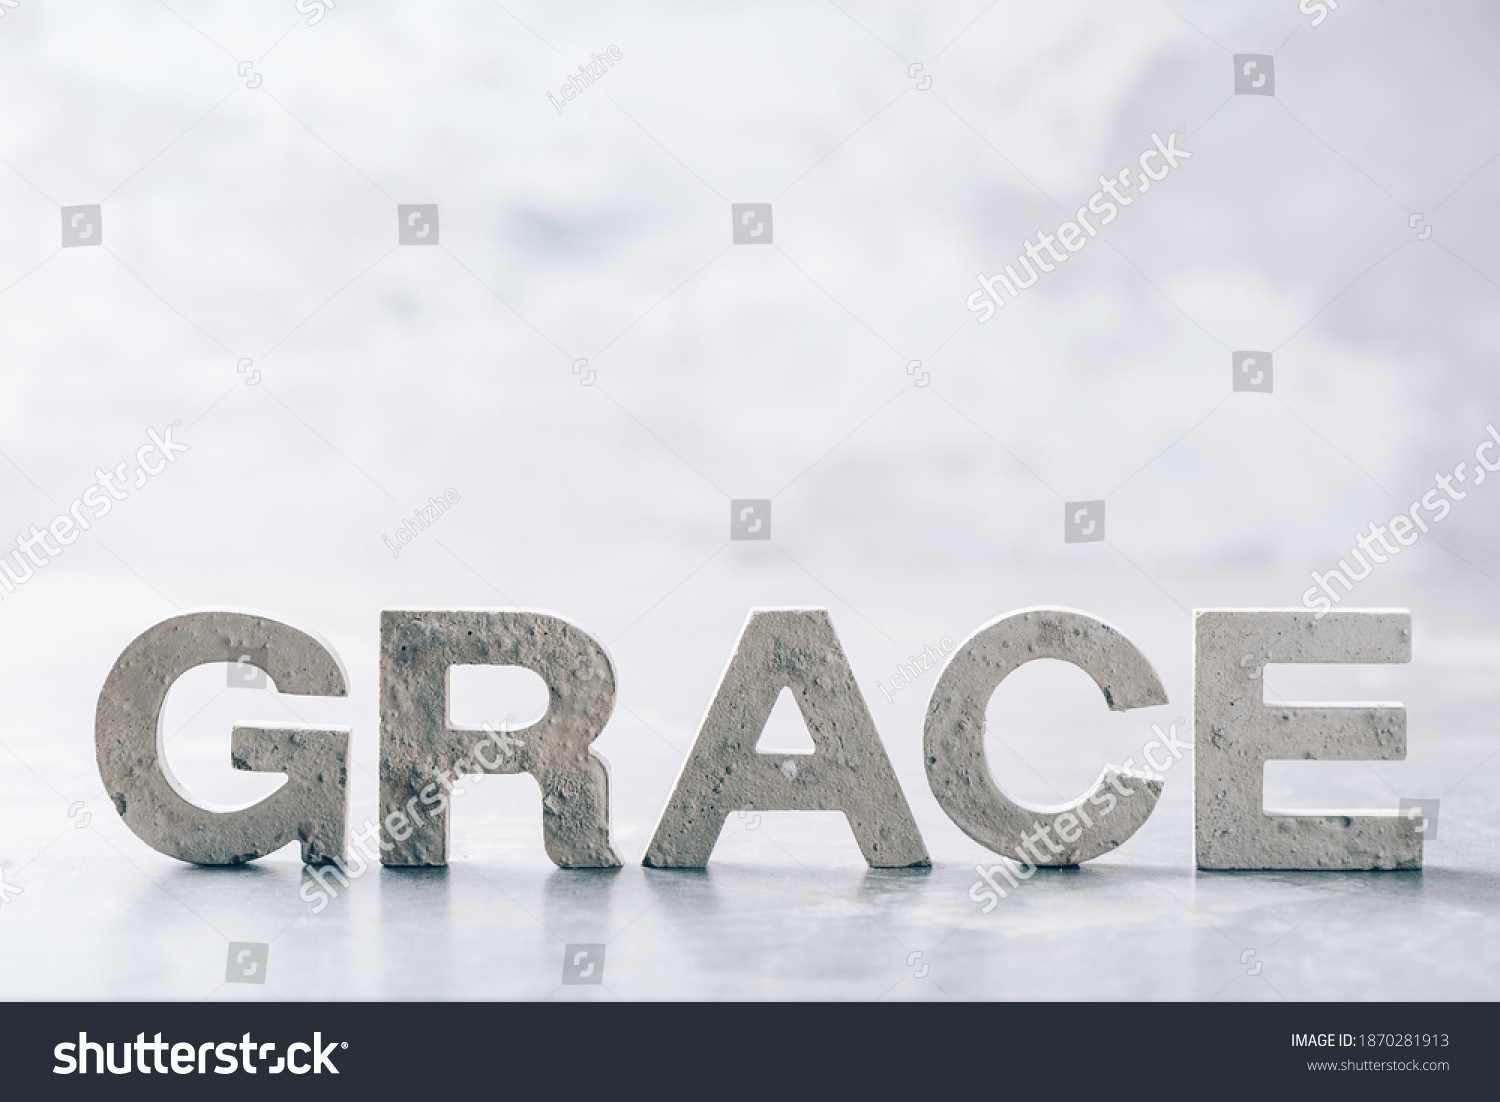 Word GRACE made with cement letters on grey marble background. Copy space. Biblical, spiritual or christian reminder. #1870281913